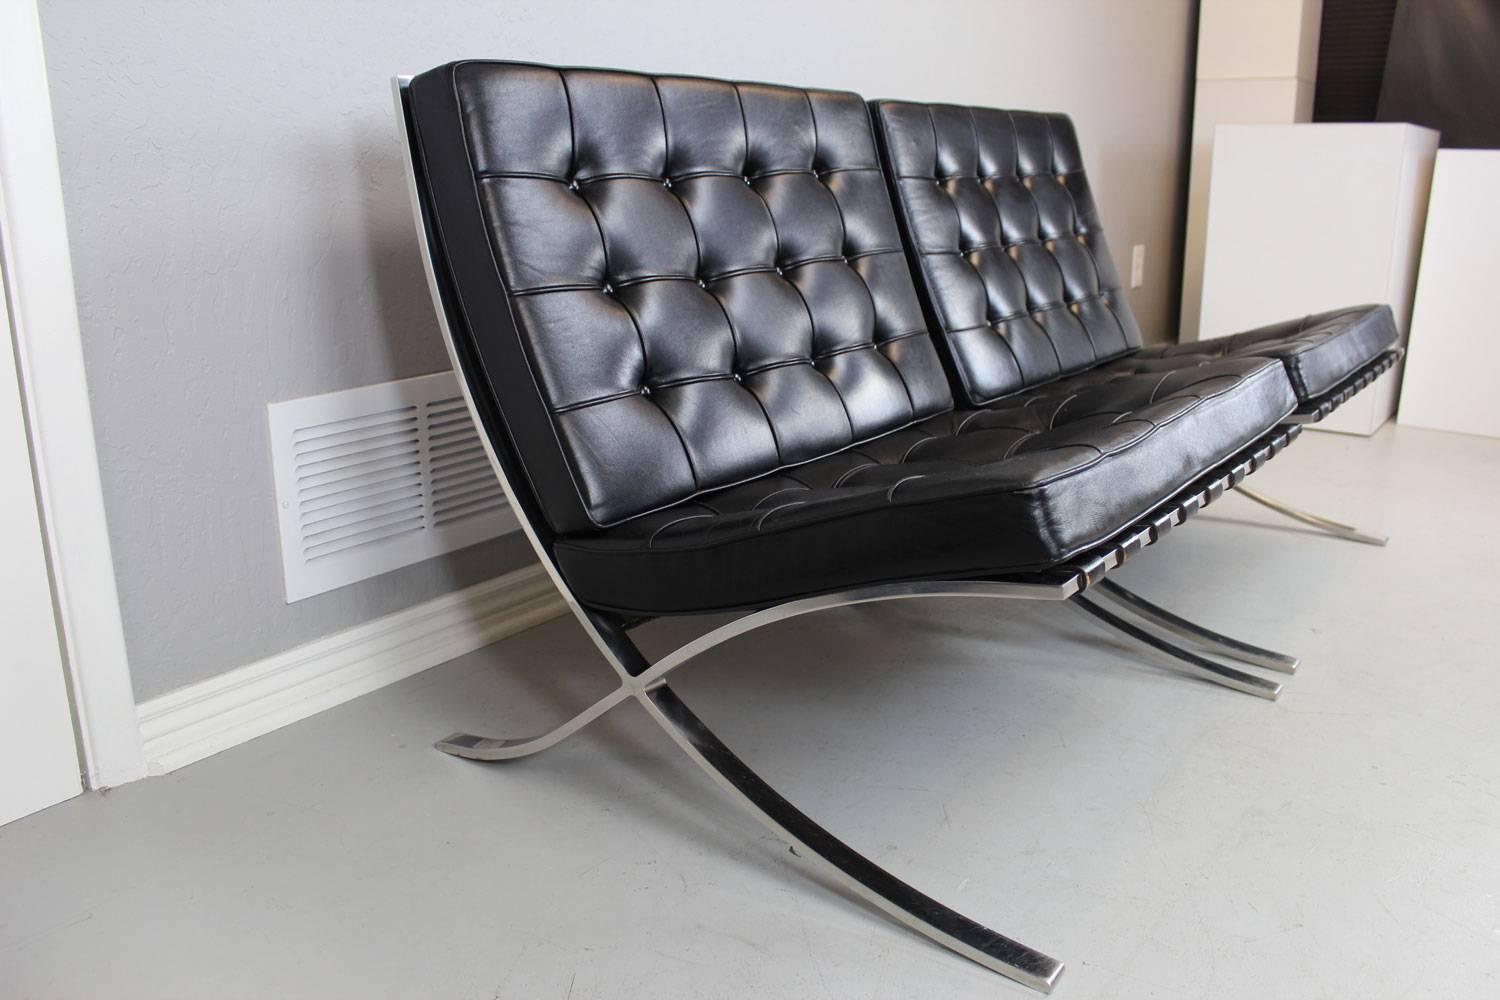 Mies van der Rohe Barcelona chairs for Knoll, circa 1960s. Leather is in exceptional condition. No rips, tears, or holes. Straps are in excellent condition.  Just a nice slightly worn overall patina finish. They look great.  All buttons are on the